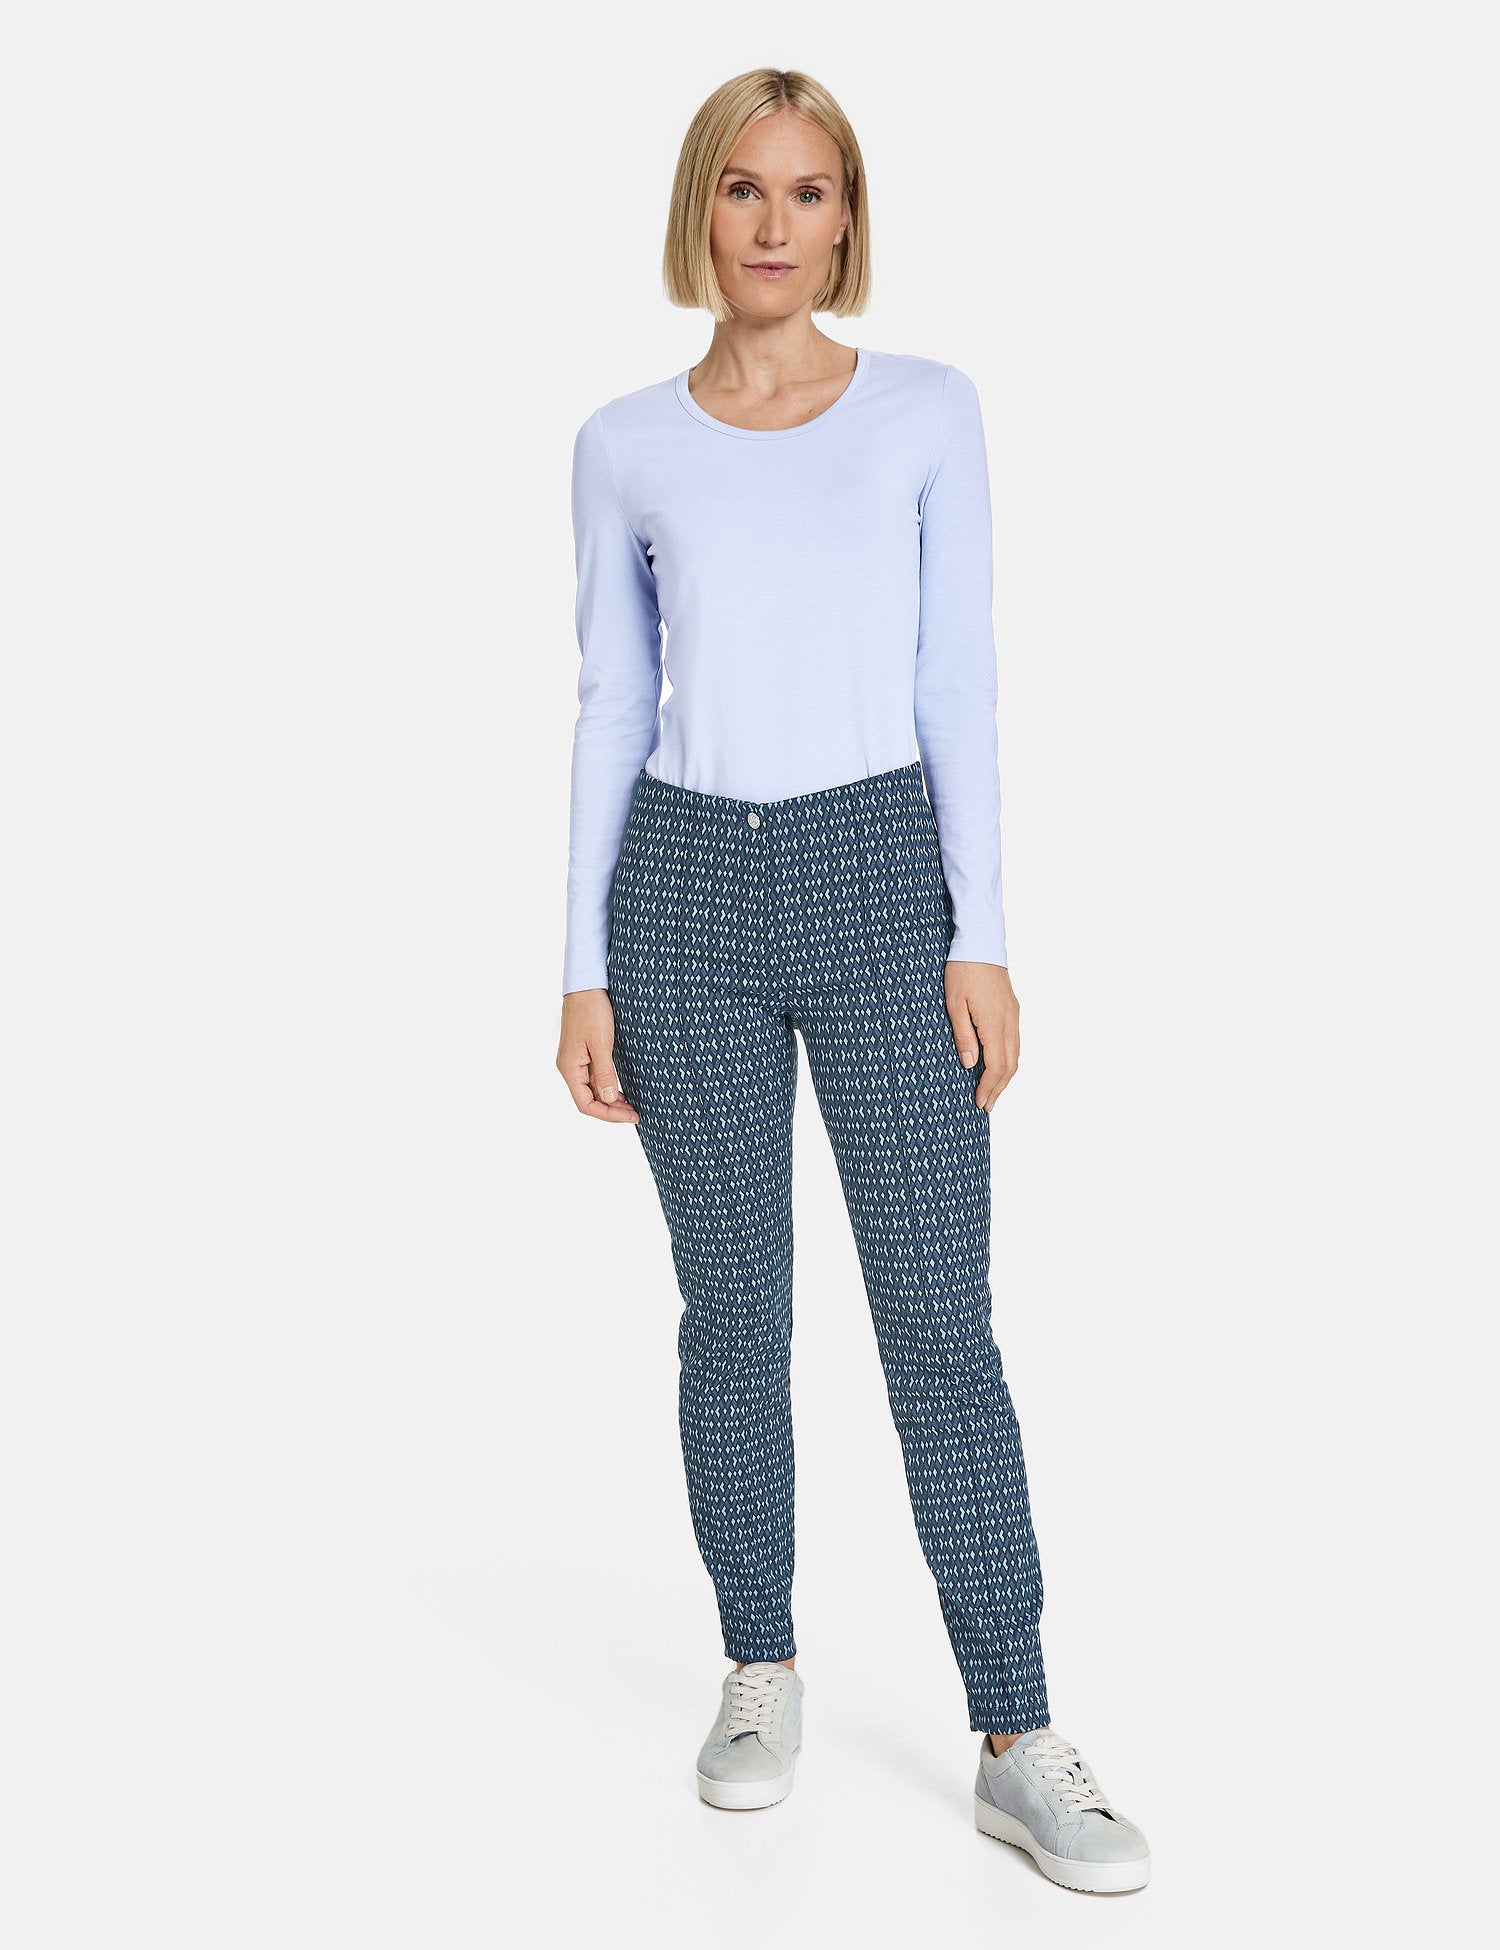 Patterned 7/8-Length Trousers In A Slim Fit_925029-66650_8080_07